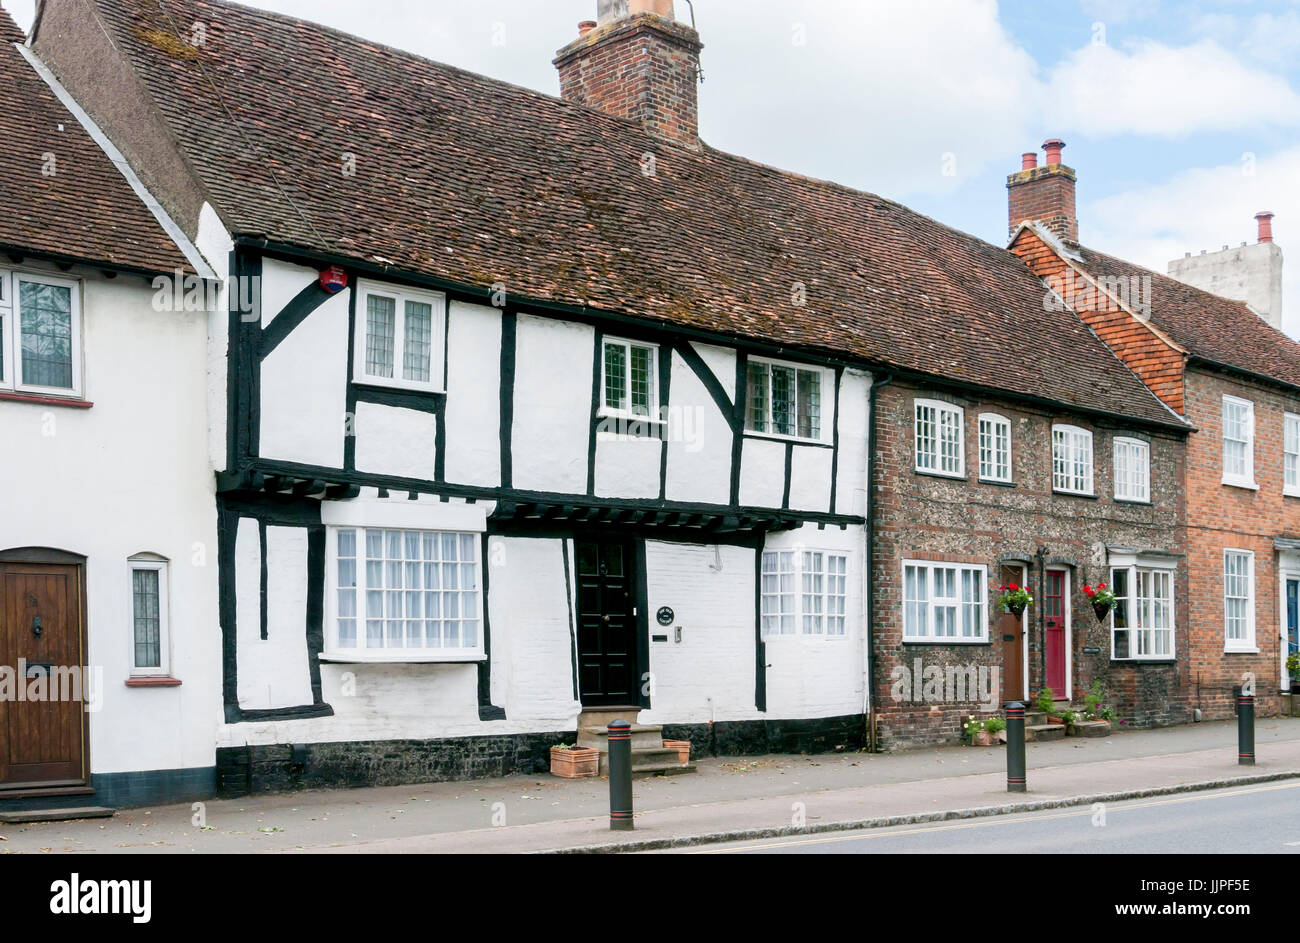 A row of classical georgian and tudor style terrace houses in the high street of wendover, buckinghamshire, in the chiltern hills, UK Stock Photo